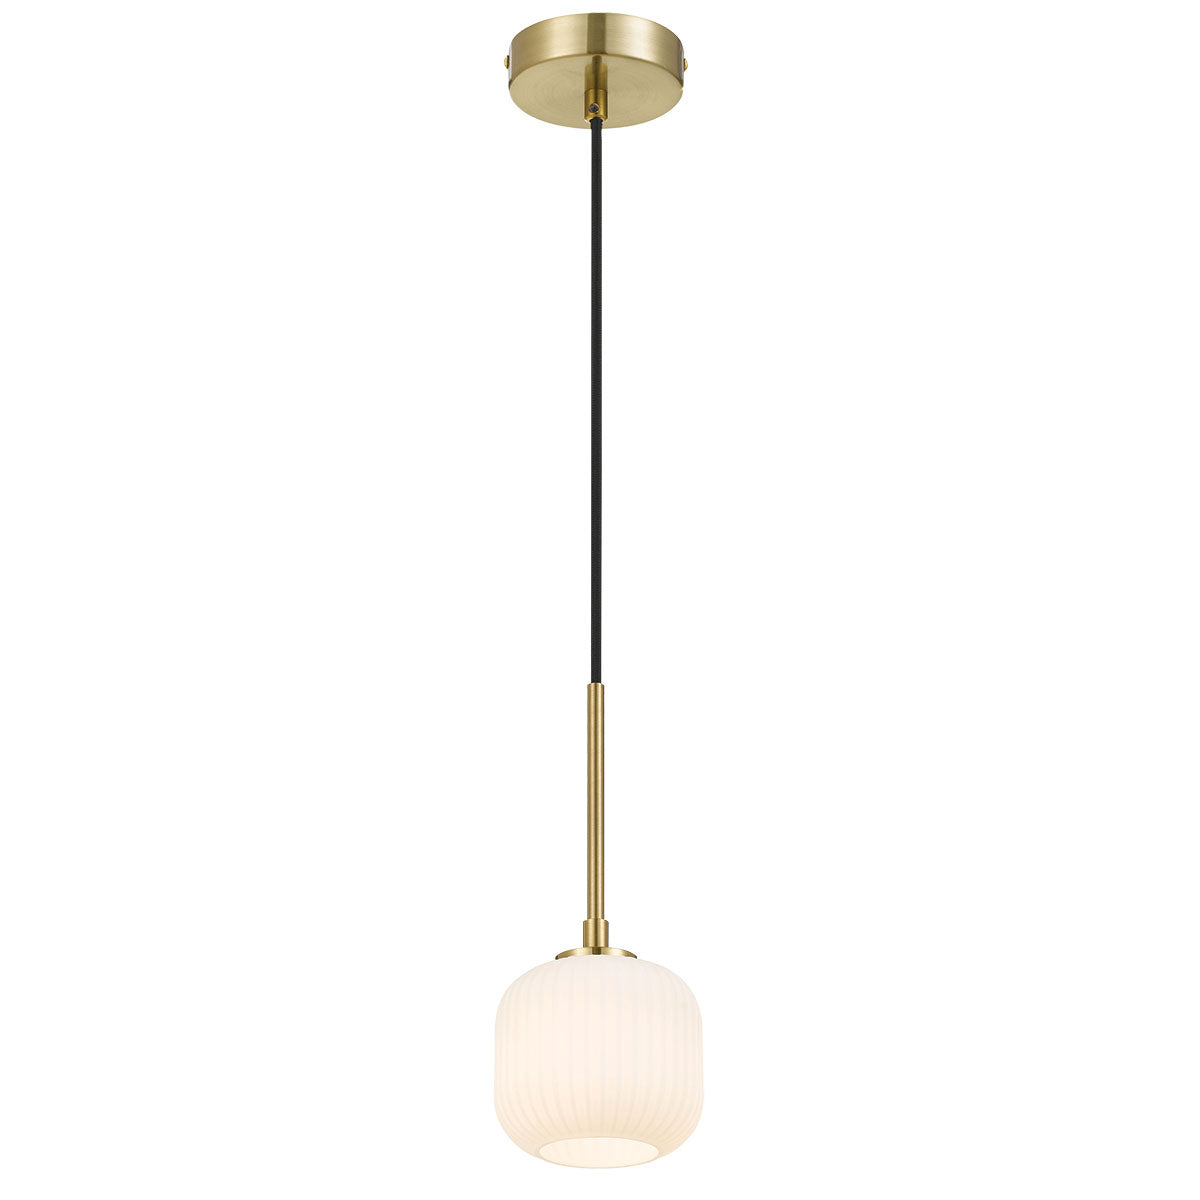 Bobo 1 Light Antique Gold with Opal Glass Pendant